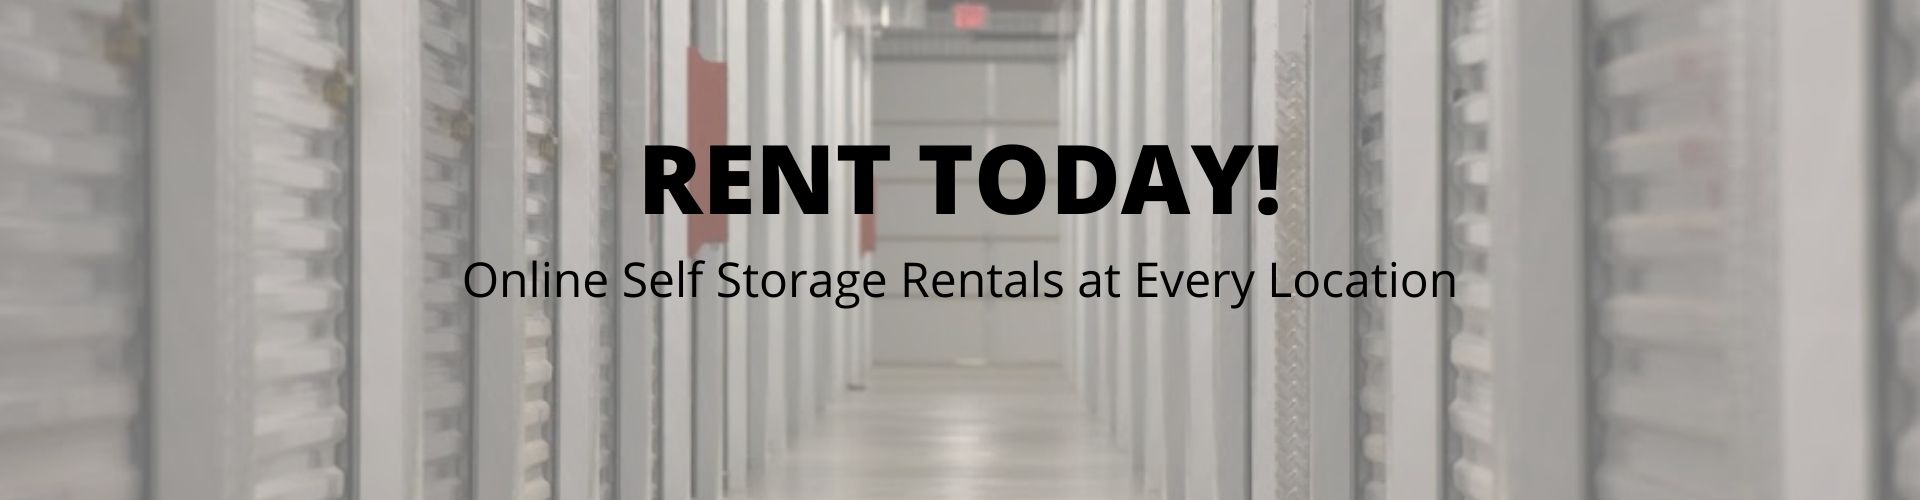 online storage rentals at 4 Storage 4 You in Philadelphia and New Jersey